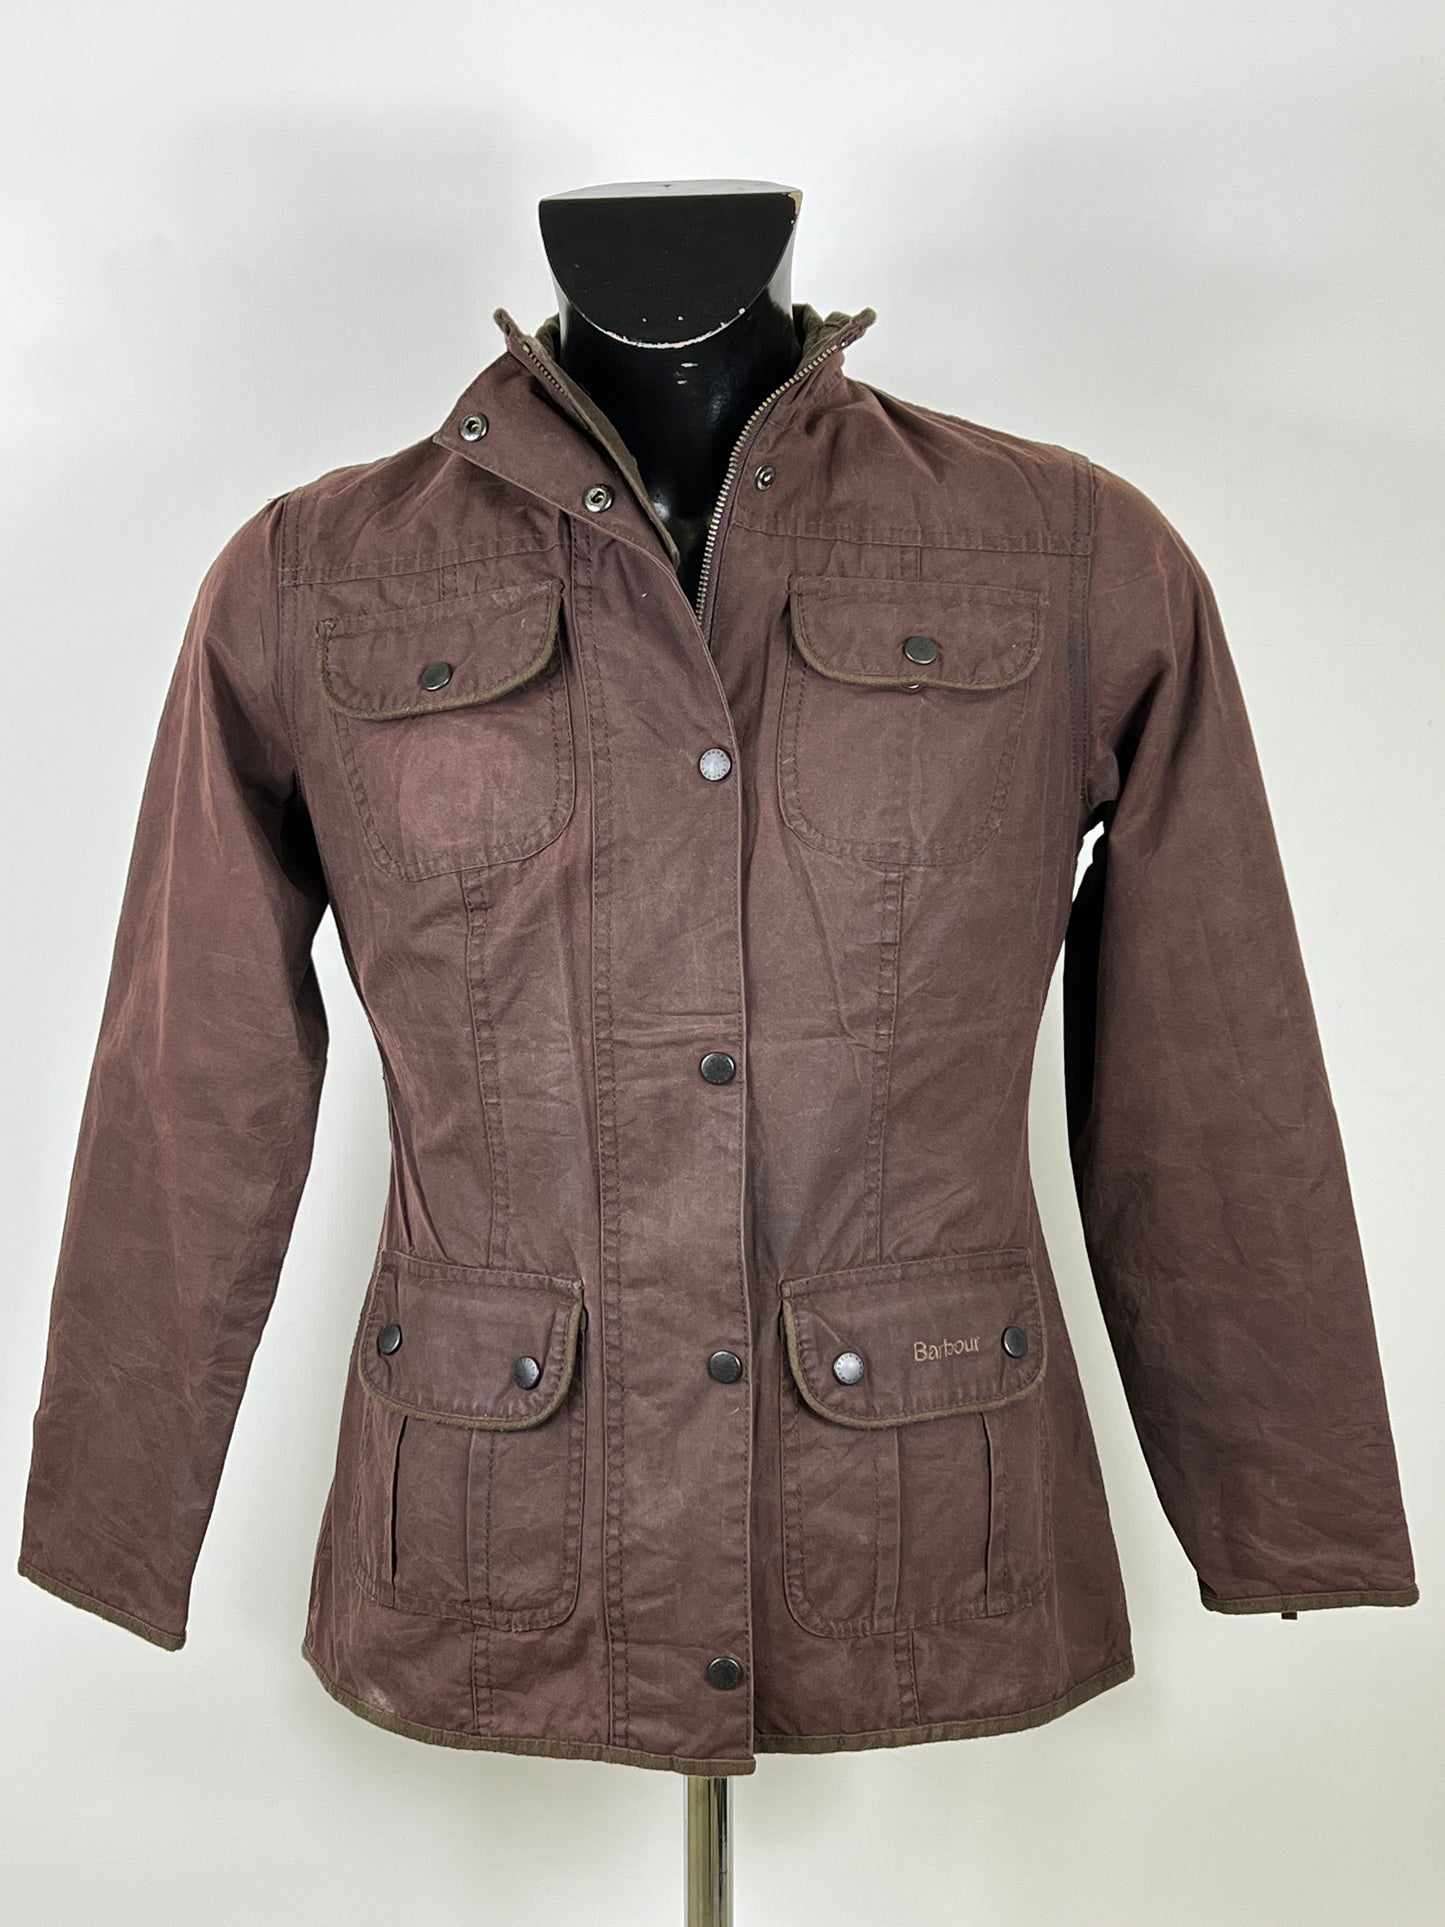 Giacca Barbour corta donna marrone UK8 Xsmall Brown short Lady Utility jacket XS tg.38